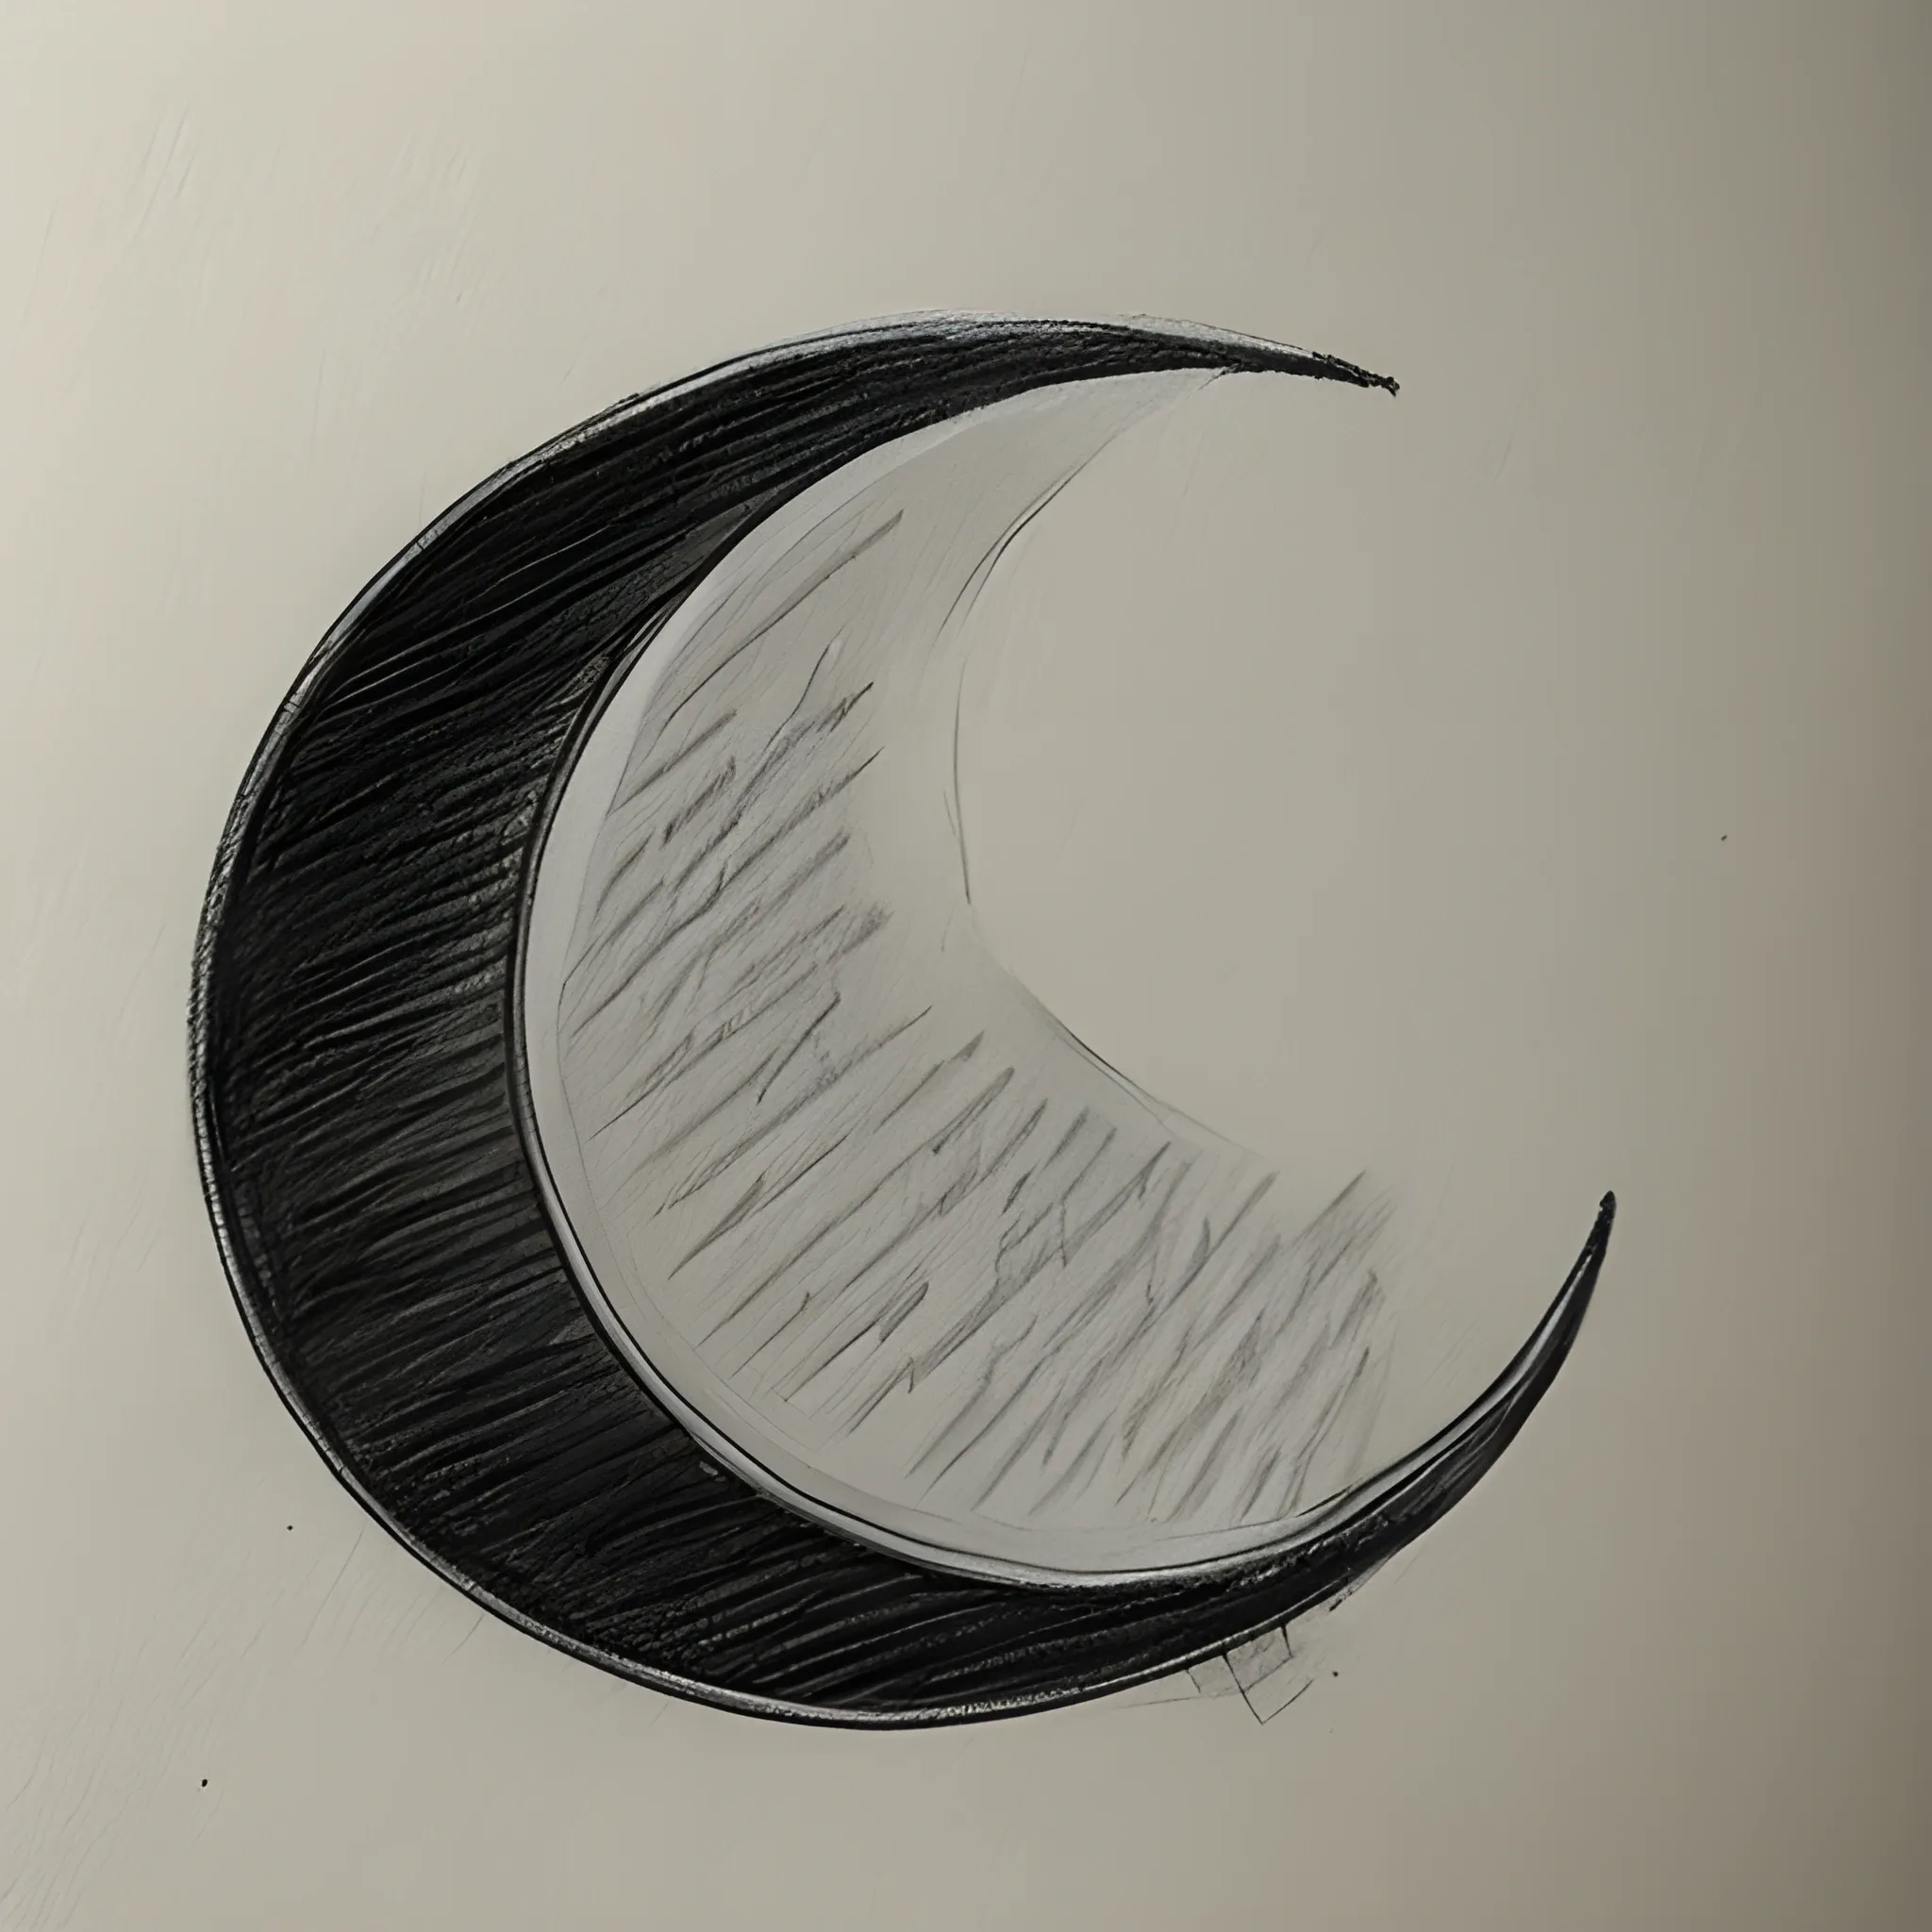 pencil sketch of a book with a crescent moon